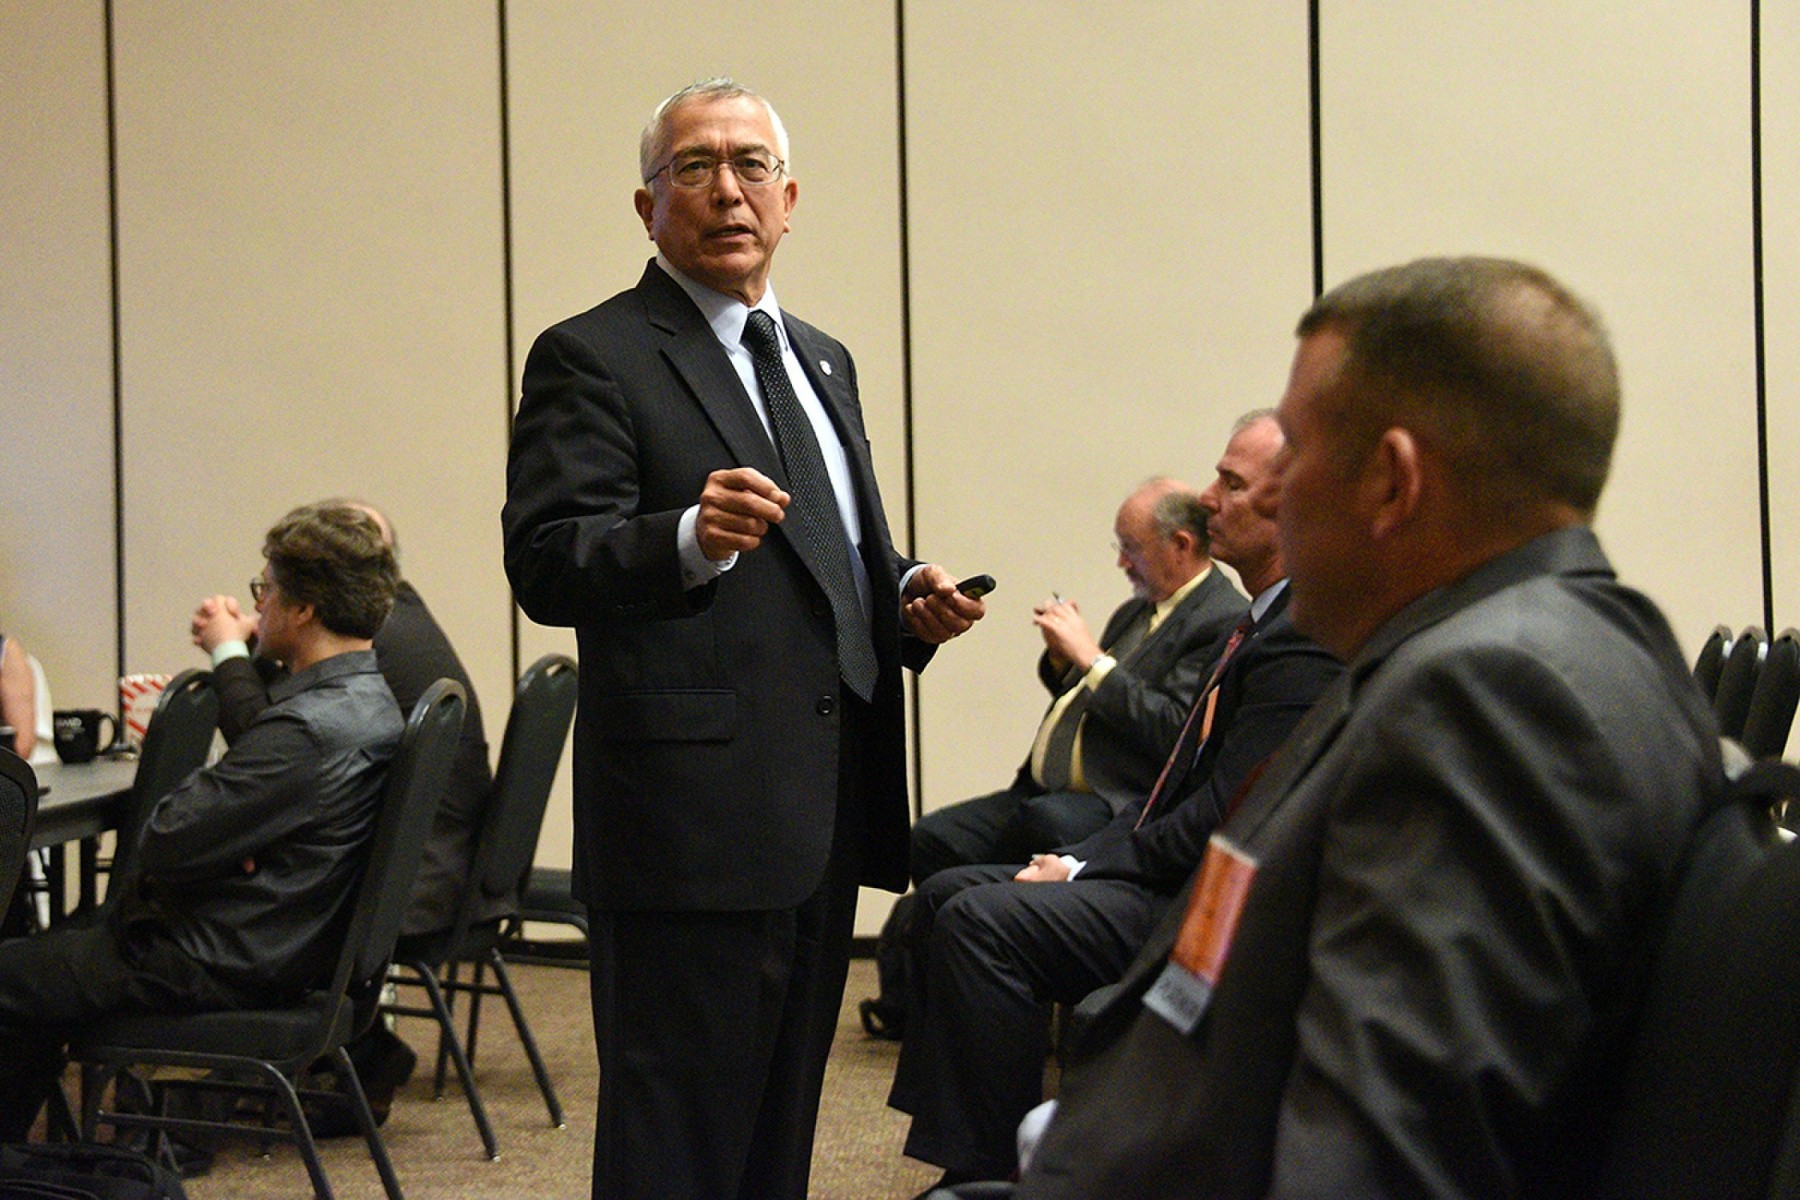 SMDC Tech Center leaders discuss cyber defense at symposium Article